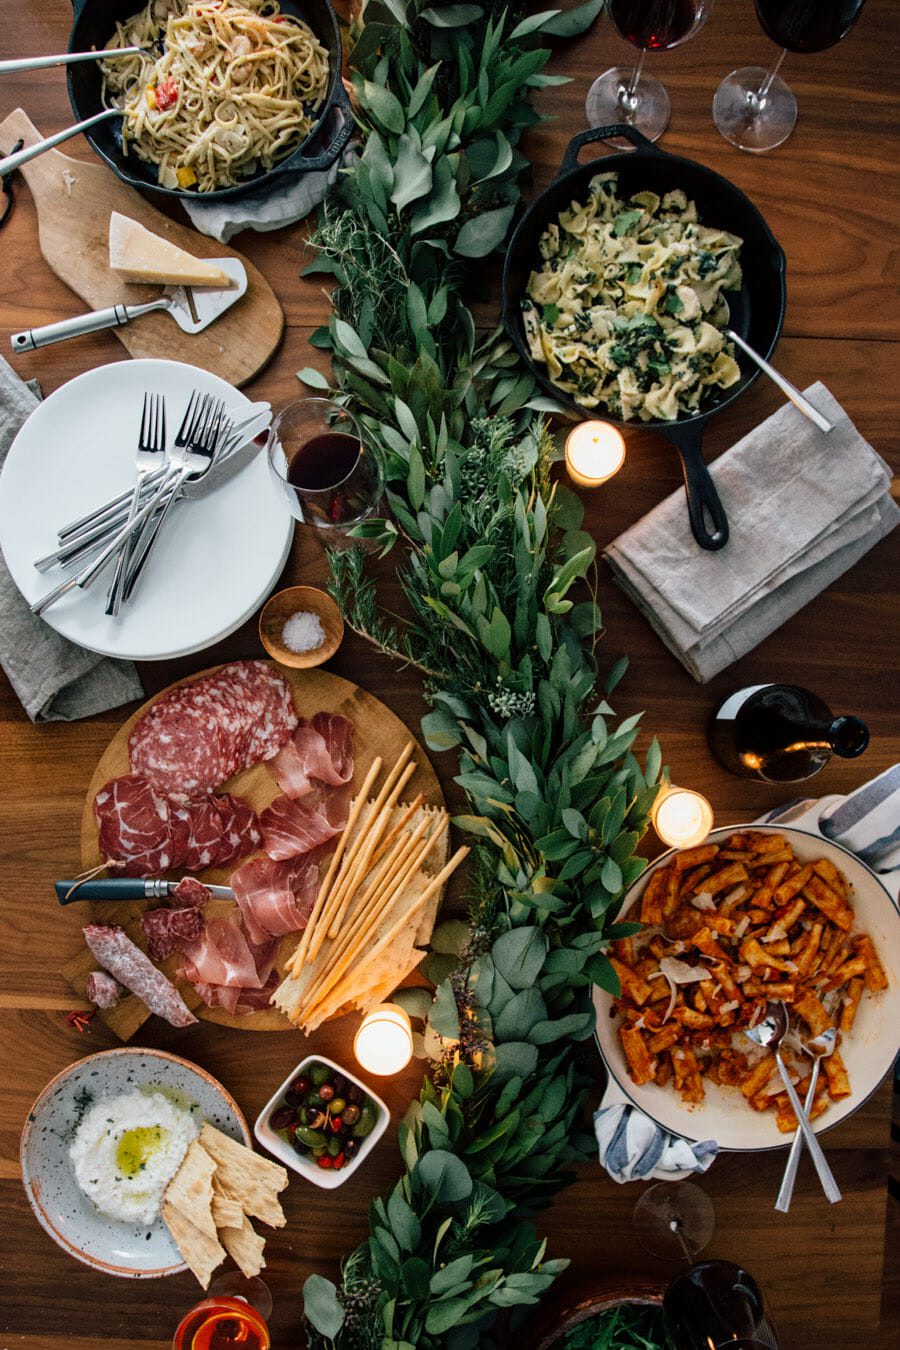 Irish Themed Dinner Party : Host the Ultimate St. Patrick's Day Dinner Party | Pizzazzerie - In ireland, the only time they decorate with shamrocks, leprechauns, etc., is during the st.